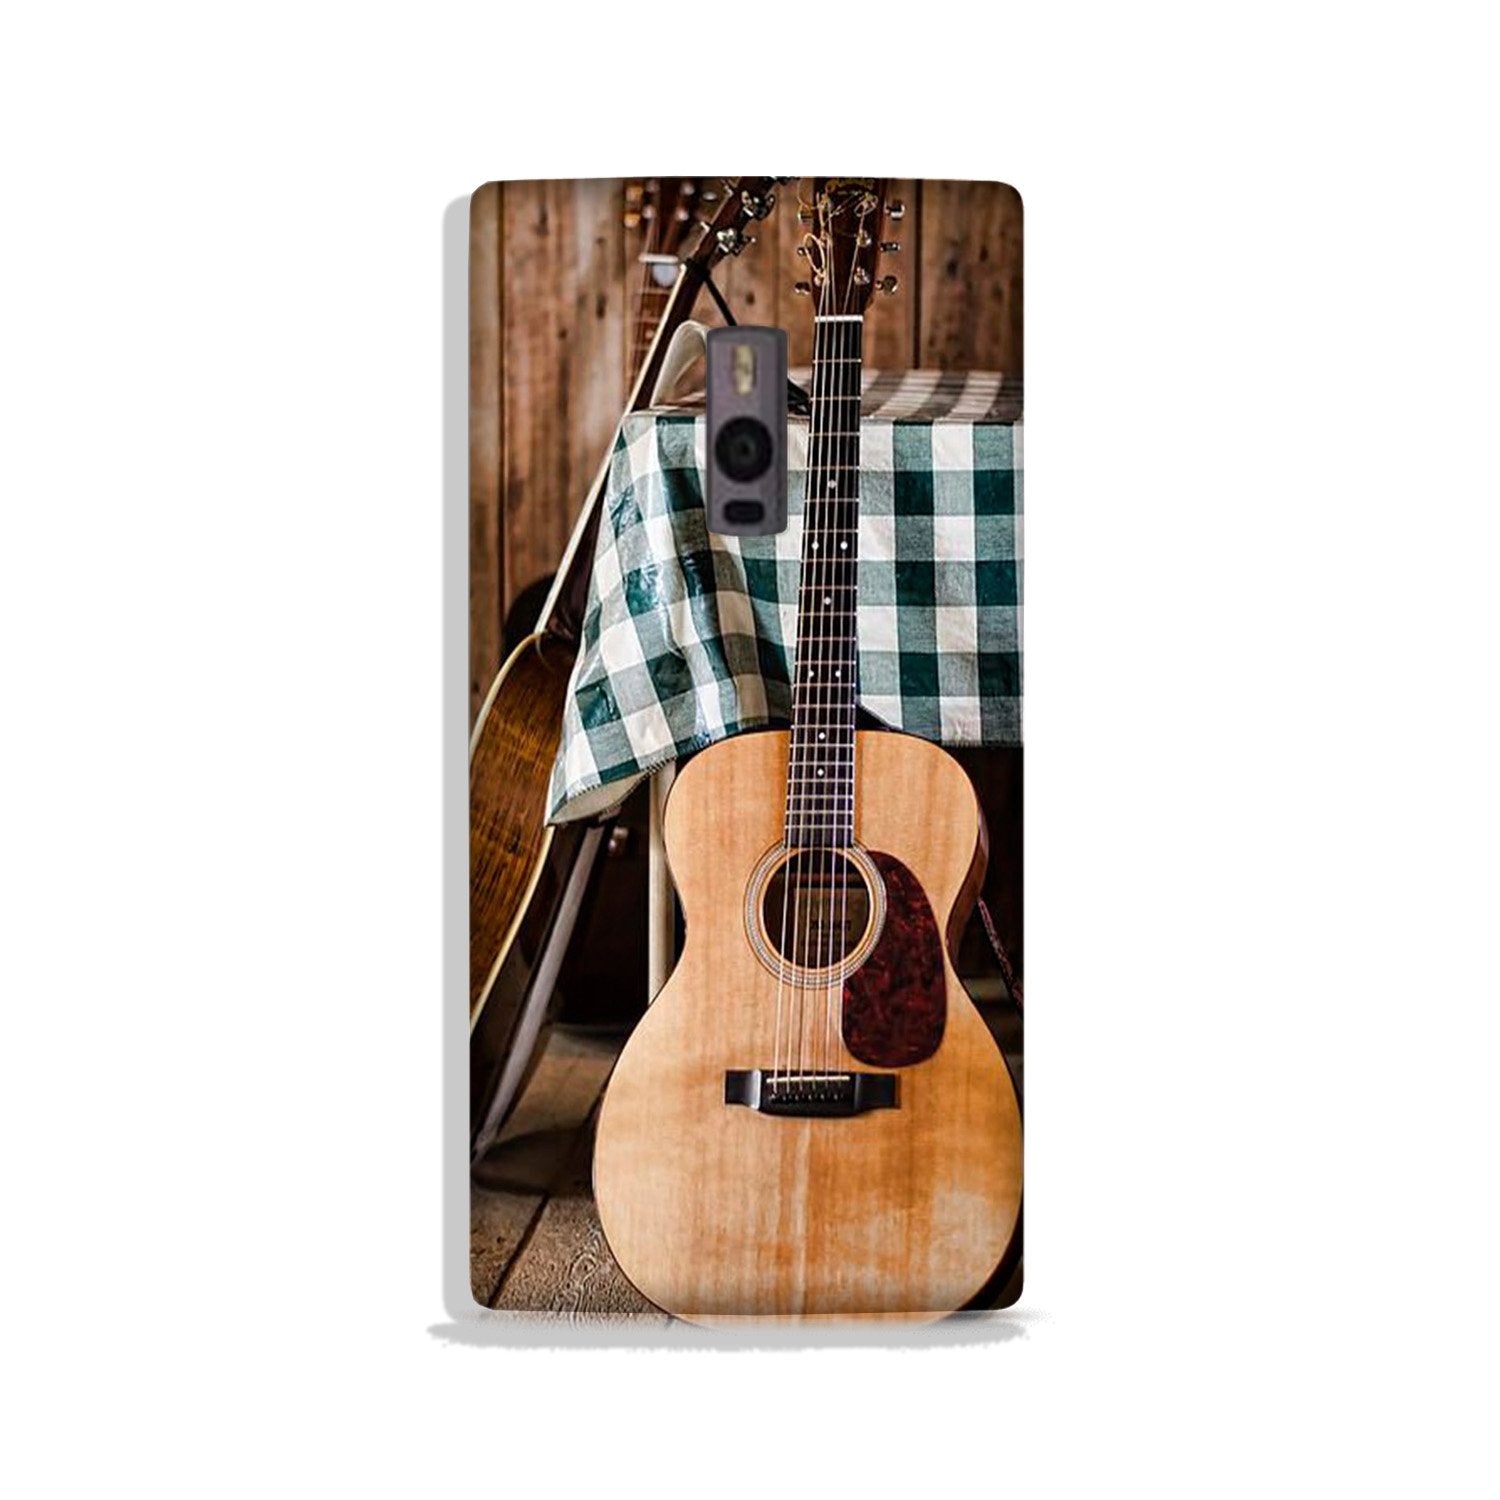 Guitar2 Case for OnePlus 2